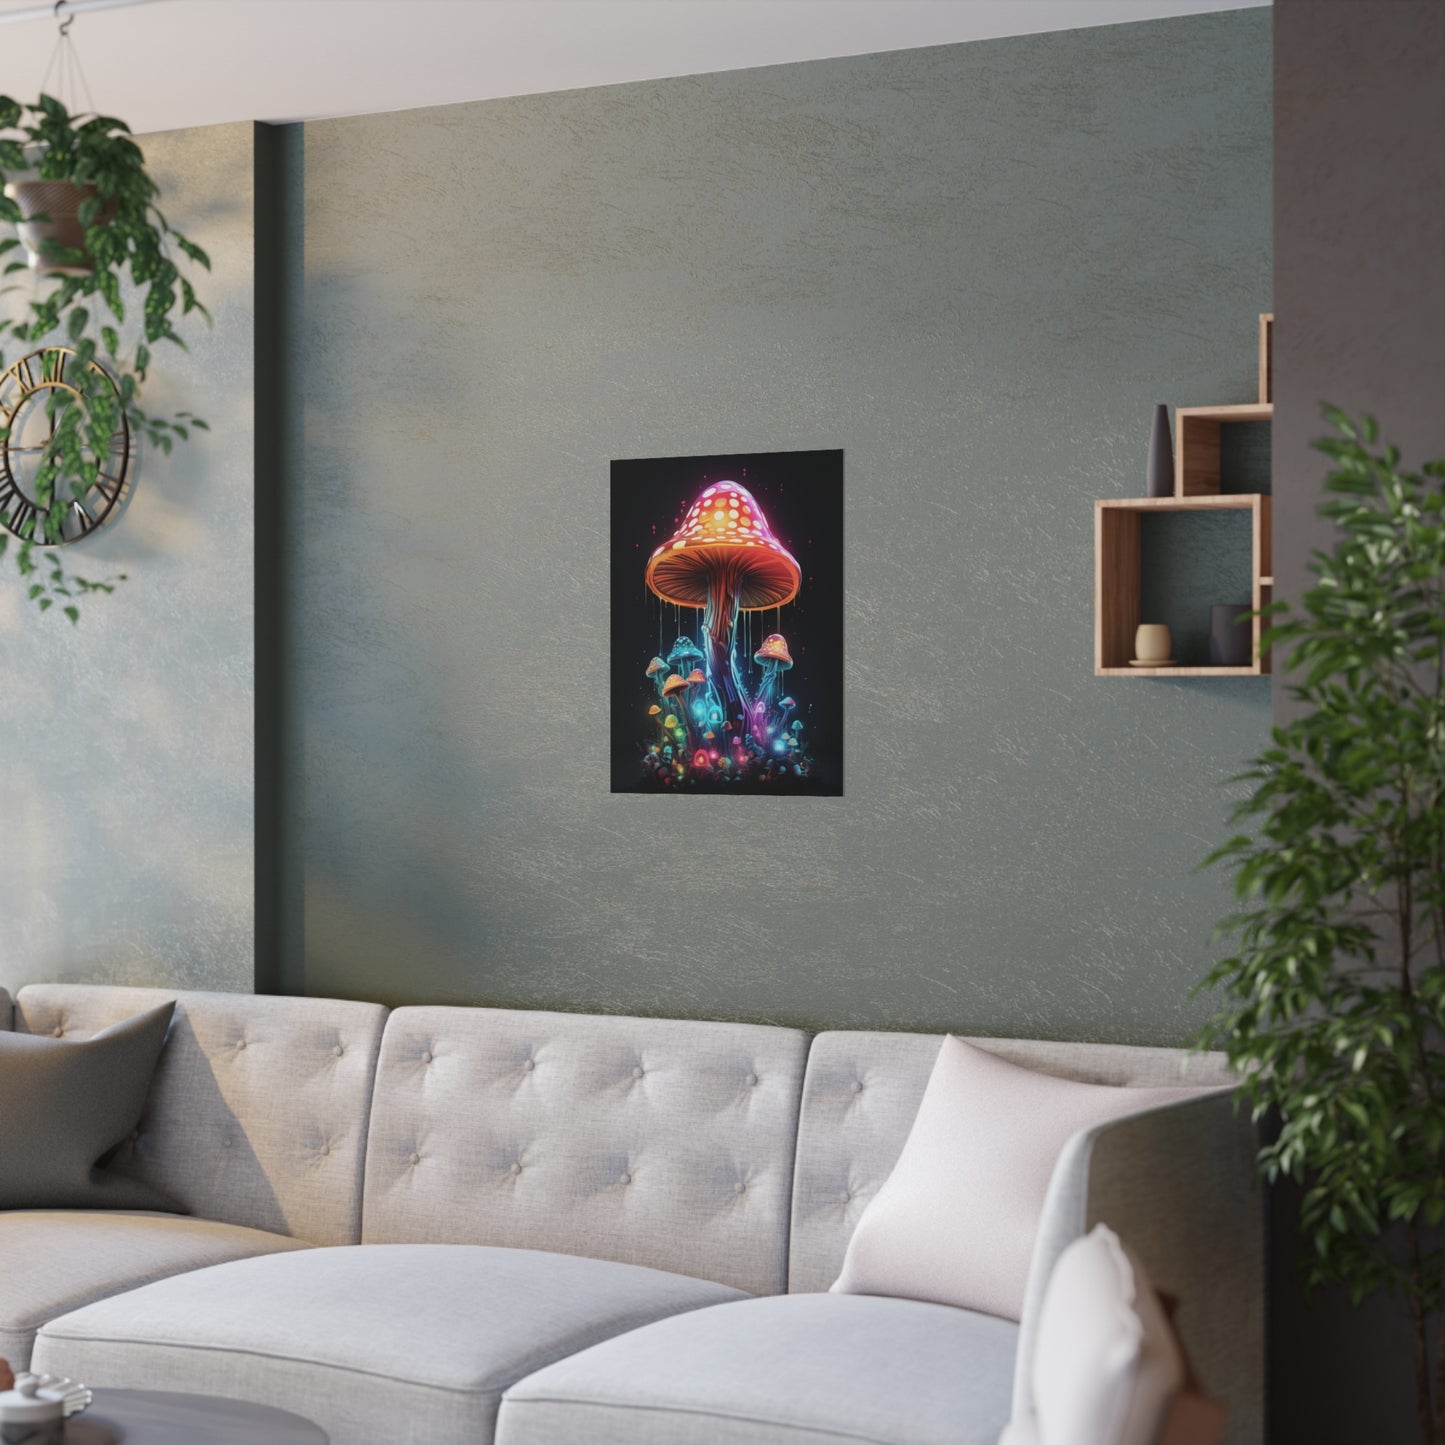 Vibrant Neon Mushroom Posters on Satin Paper - Psychedelic Wall Art in 6 Sizes